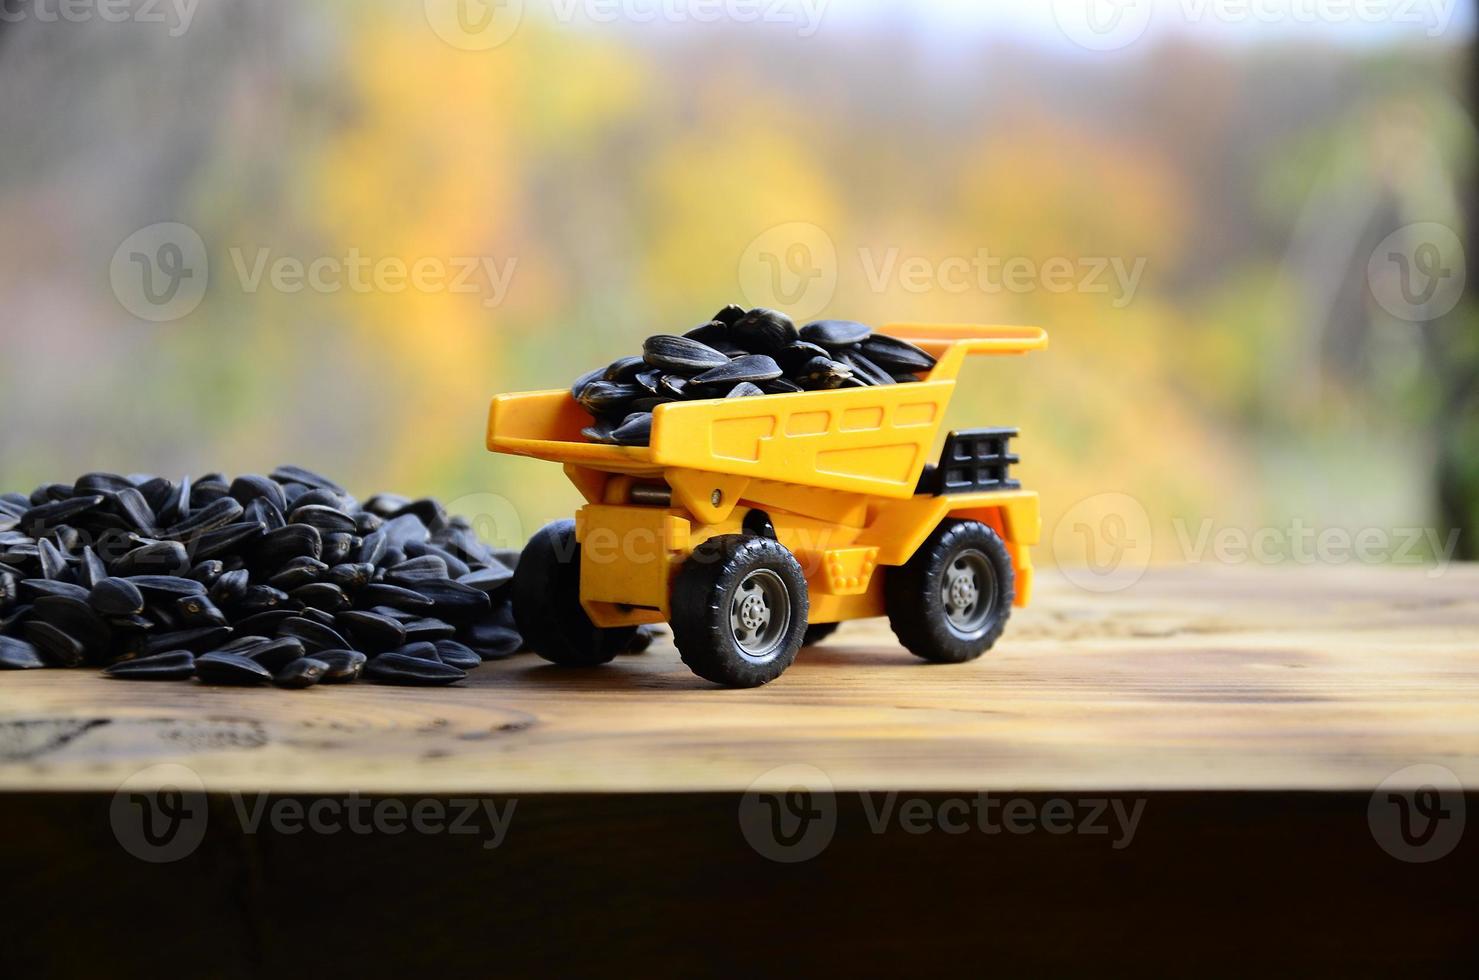 A small yellow toy truck is loaded with sunflower seeds next to a small pile of sunflower seeds. A car on a wooden surface against a background of autumn forest. Transportation of sunflower seeds photo